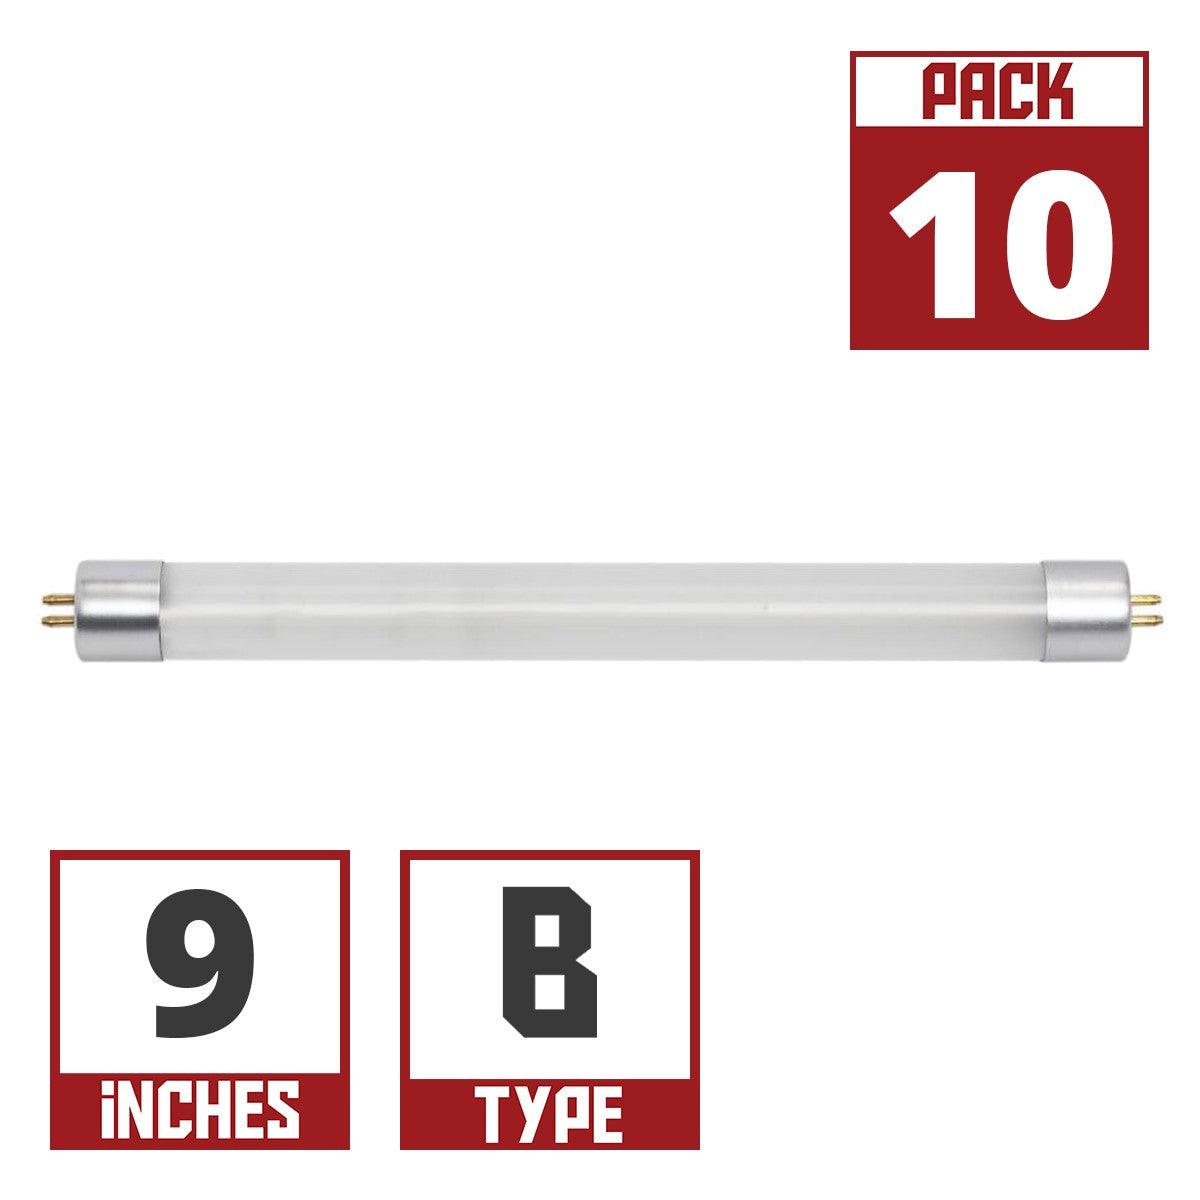 9 Inch LED mini T5 Tube, 3 Watt, 270 Lumens, 4000K, F6T5 Replacement, Ballast Bypass Double End, G5 Base (Case Of 10)